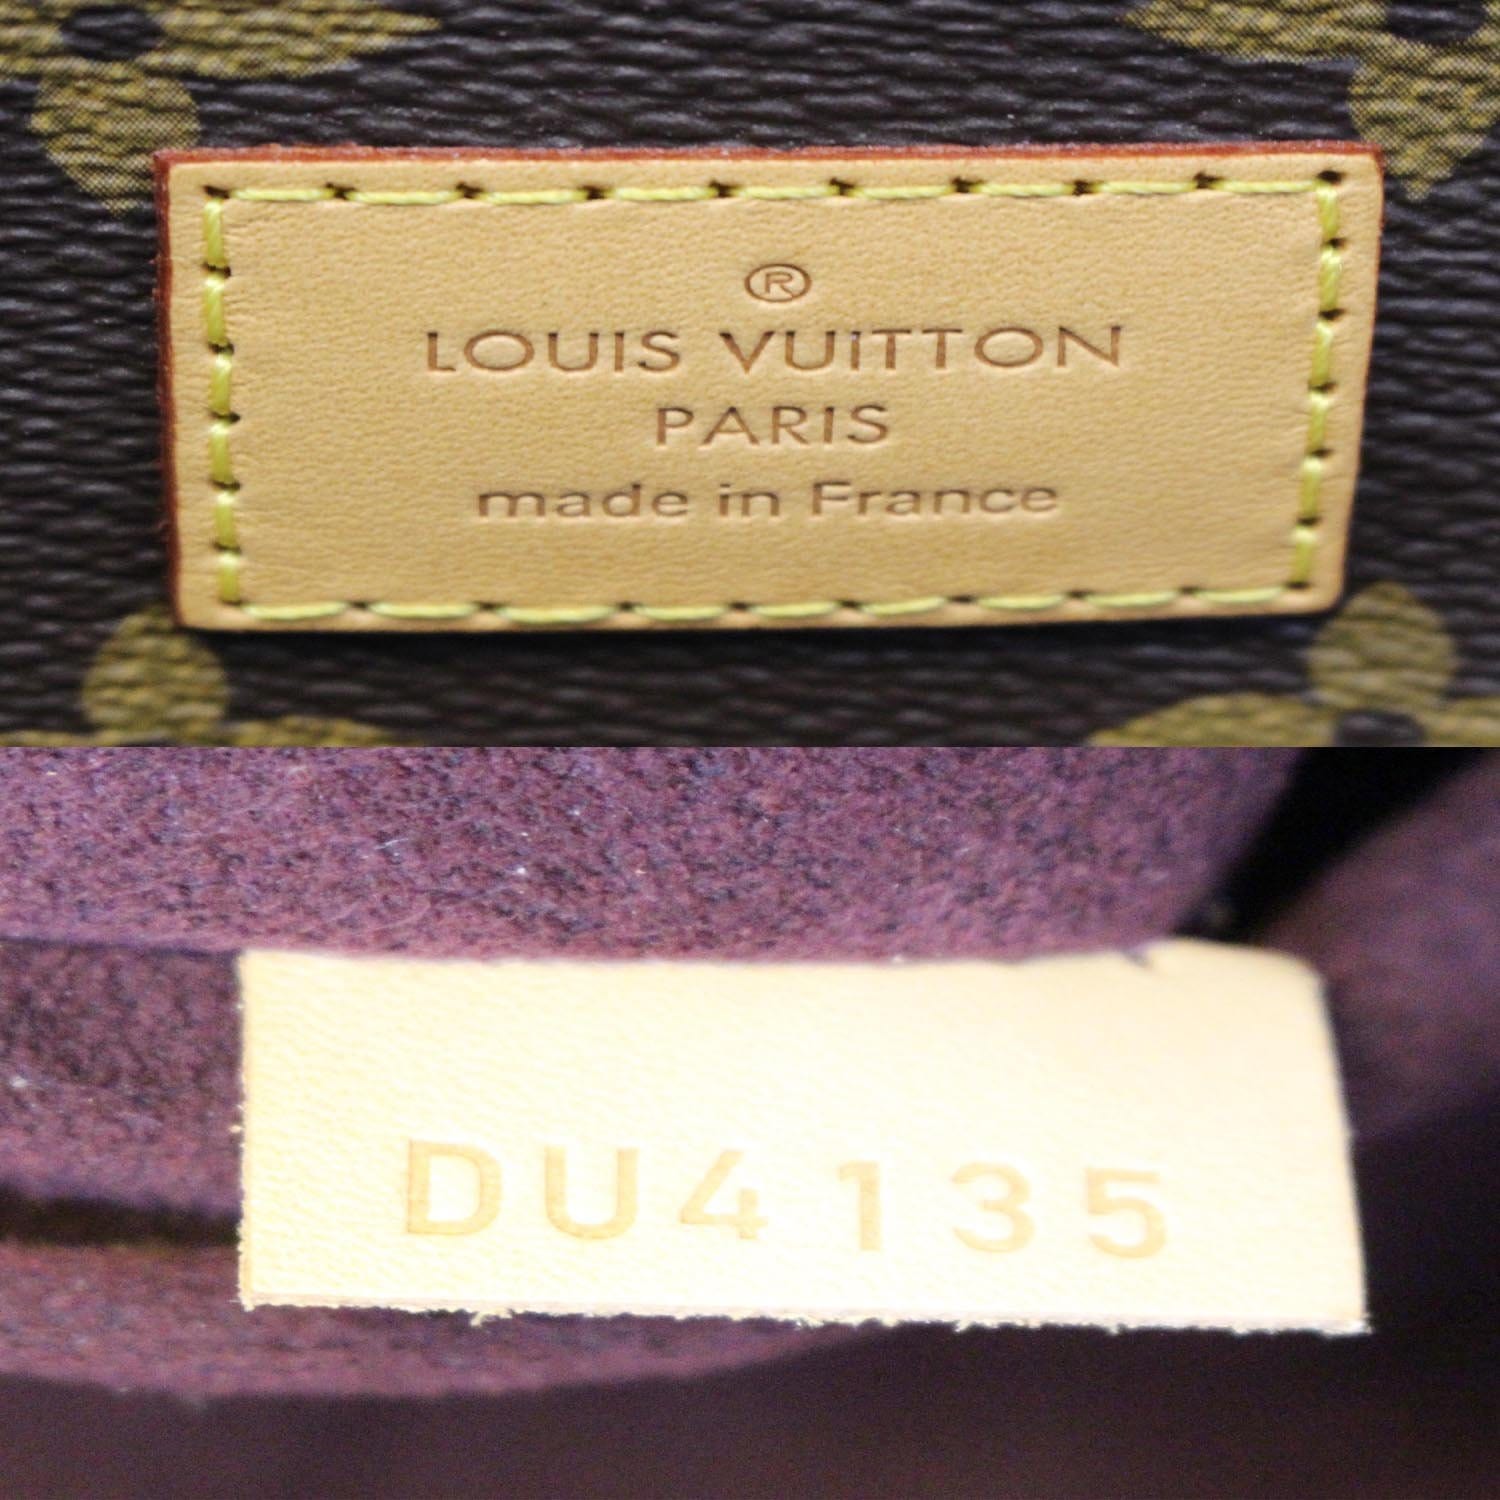 is louis vuitton inventpdr real